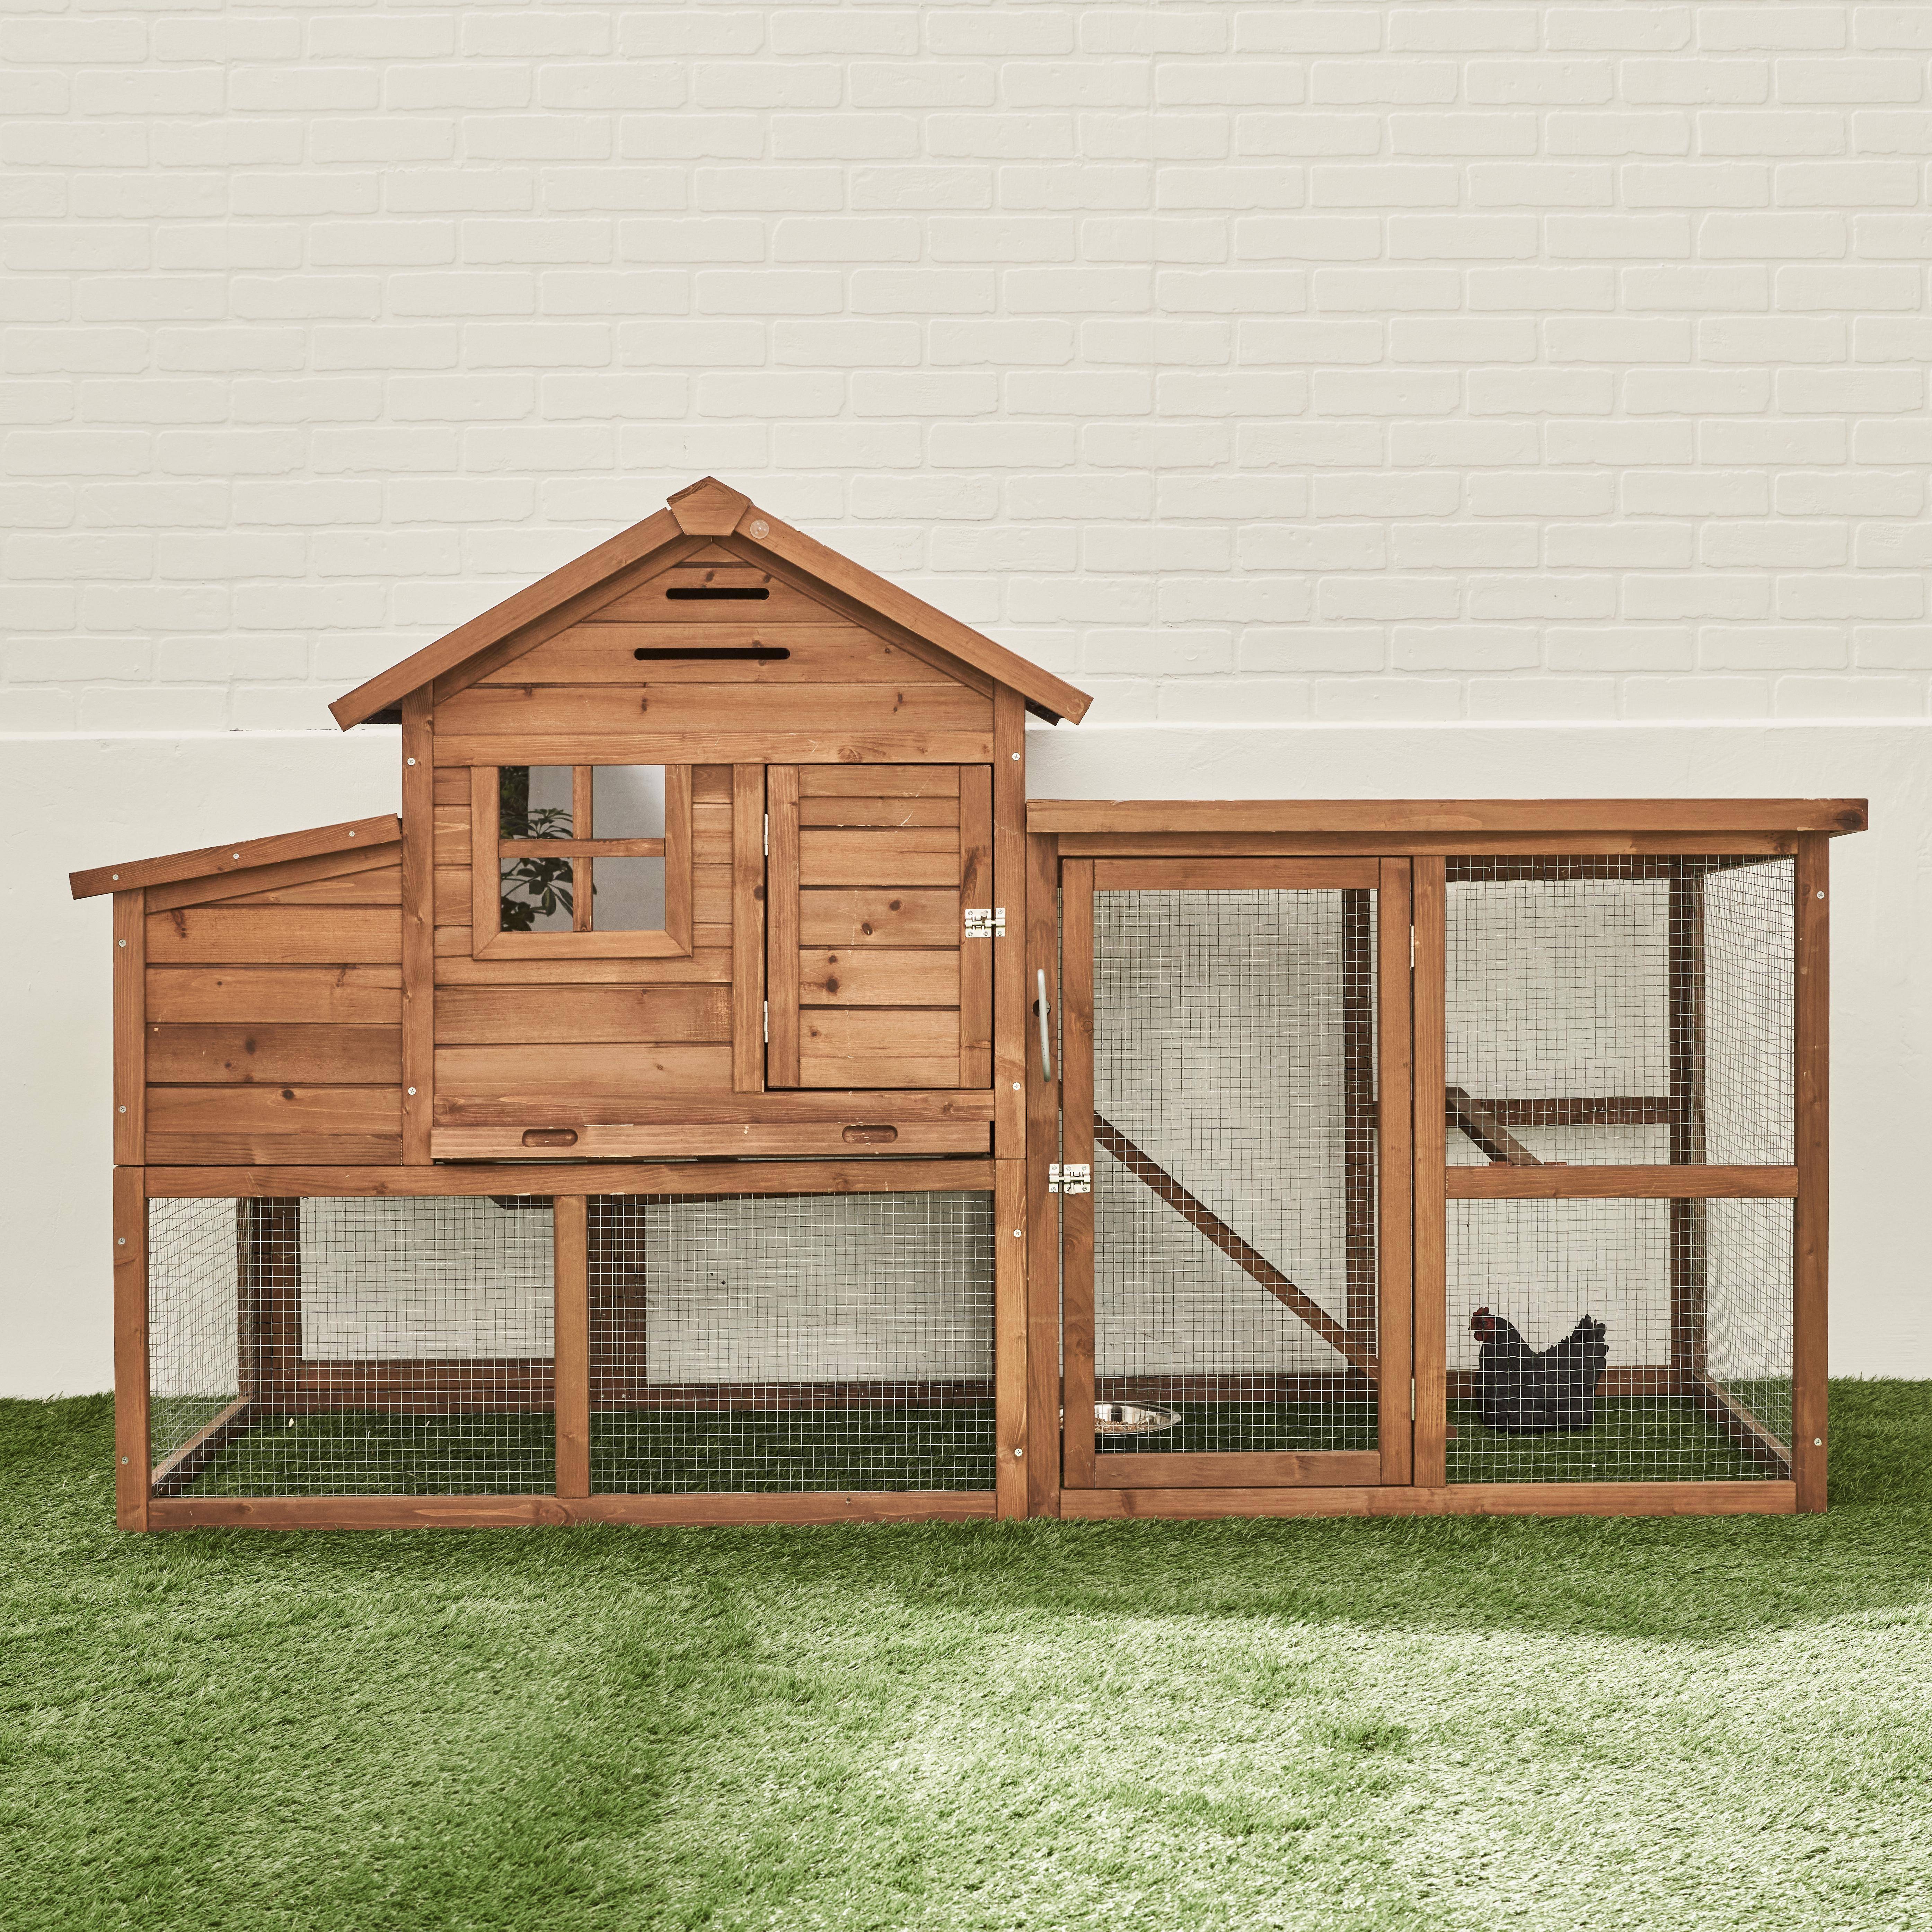 Wooden chicken coop for 4 chickens with nesting box, 195.5x75.5x116.5cm - Geline - Wood colour Photo2